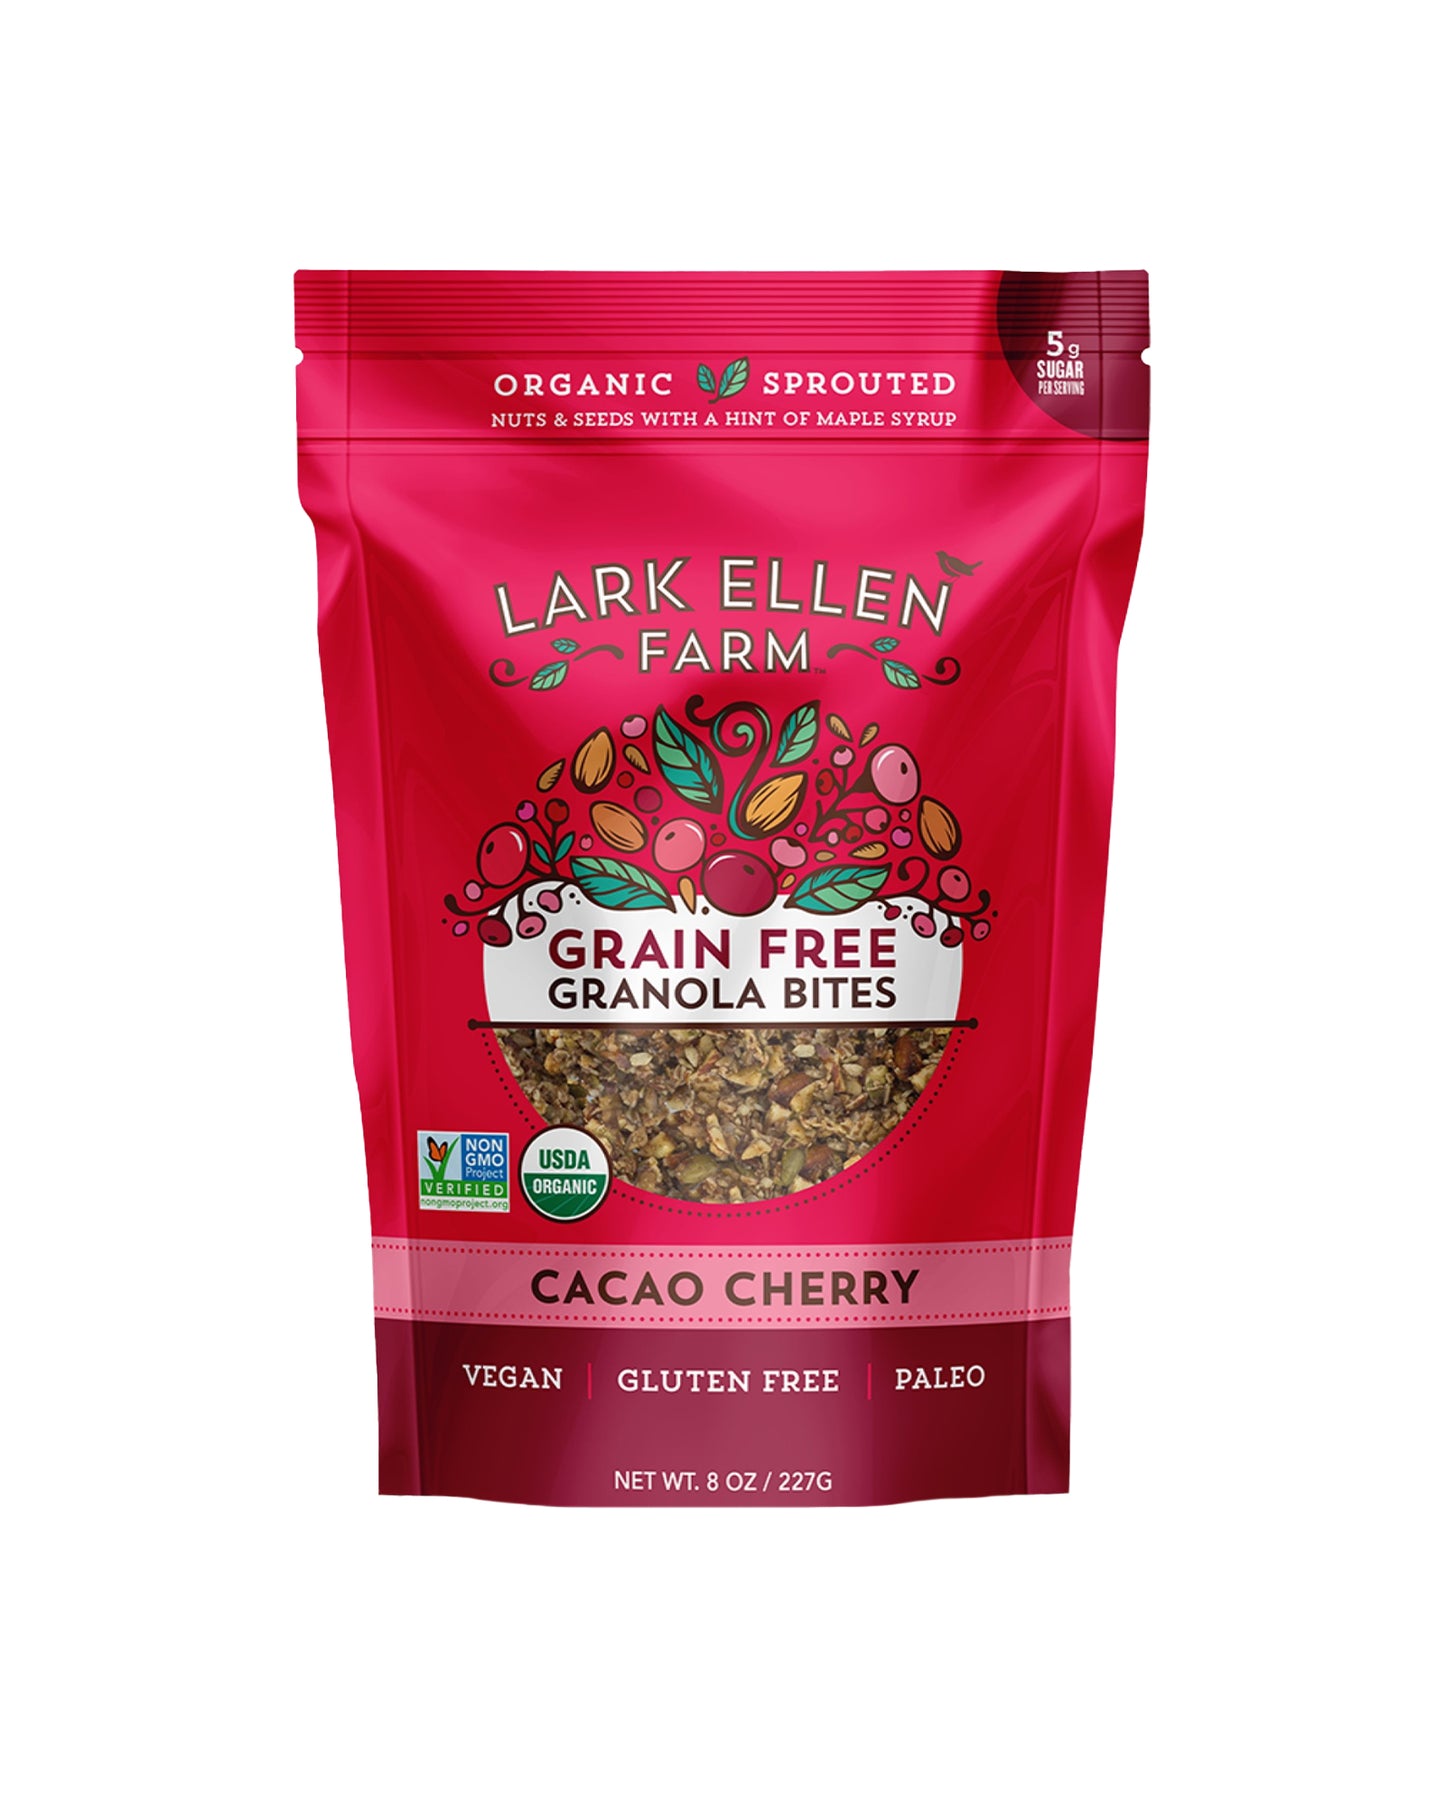 Grain-Free Cacao Cherry Sprouted Nut & Seed Granola